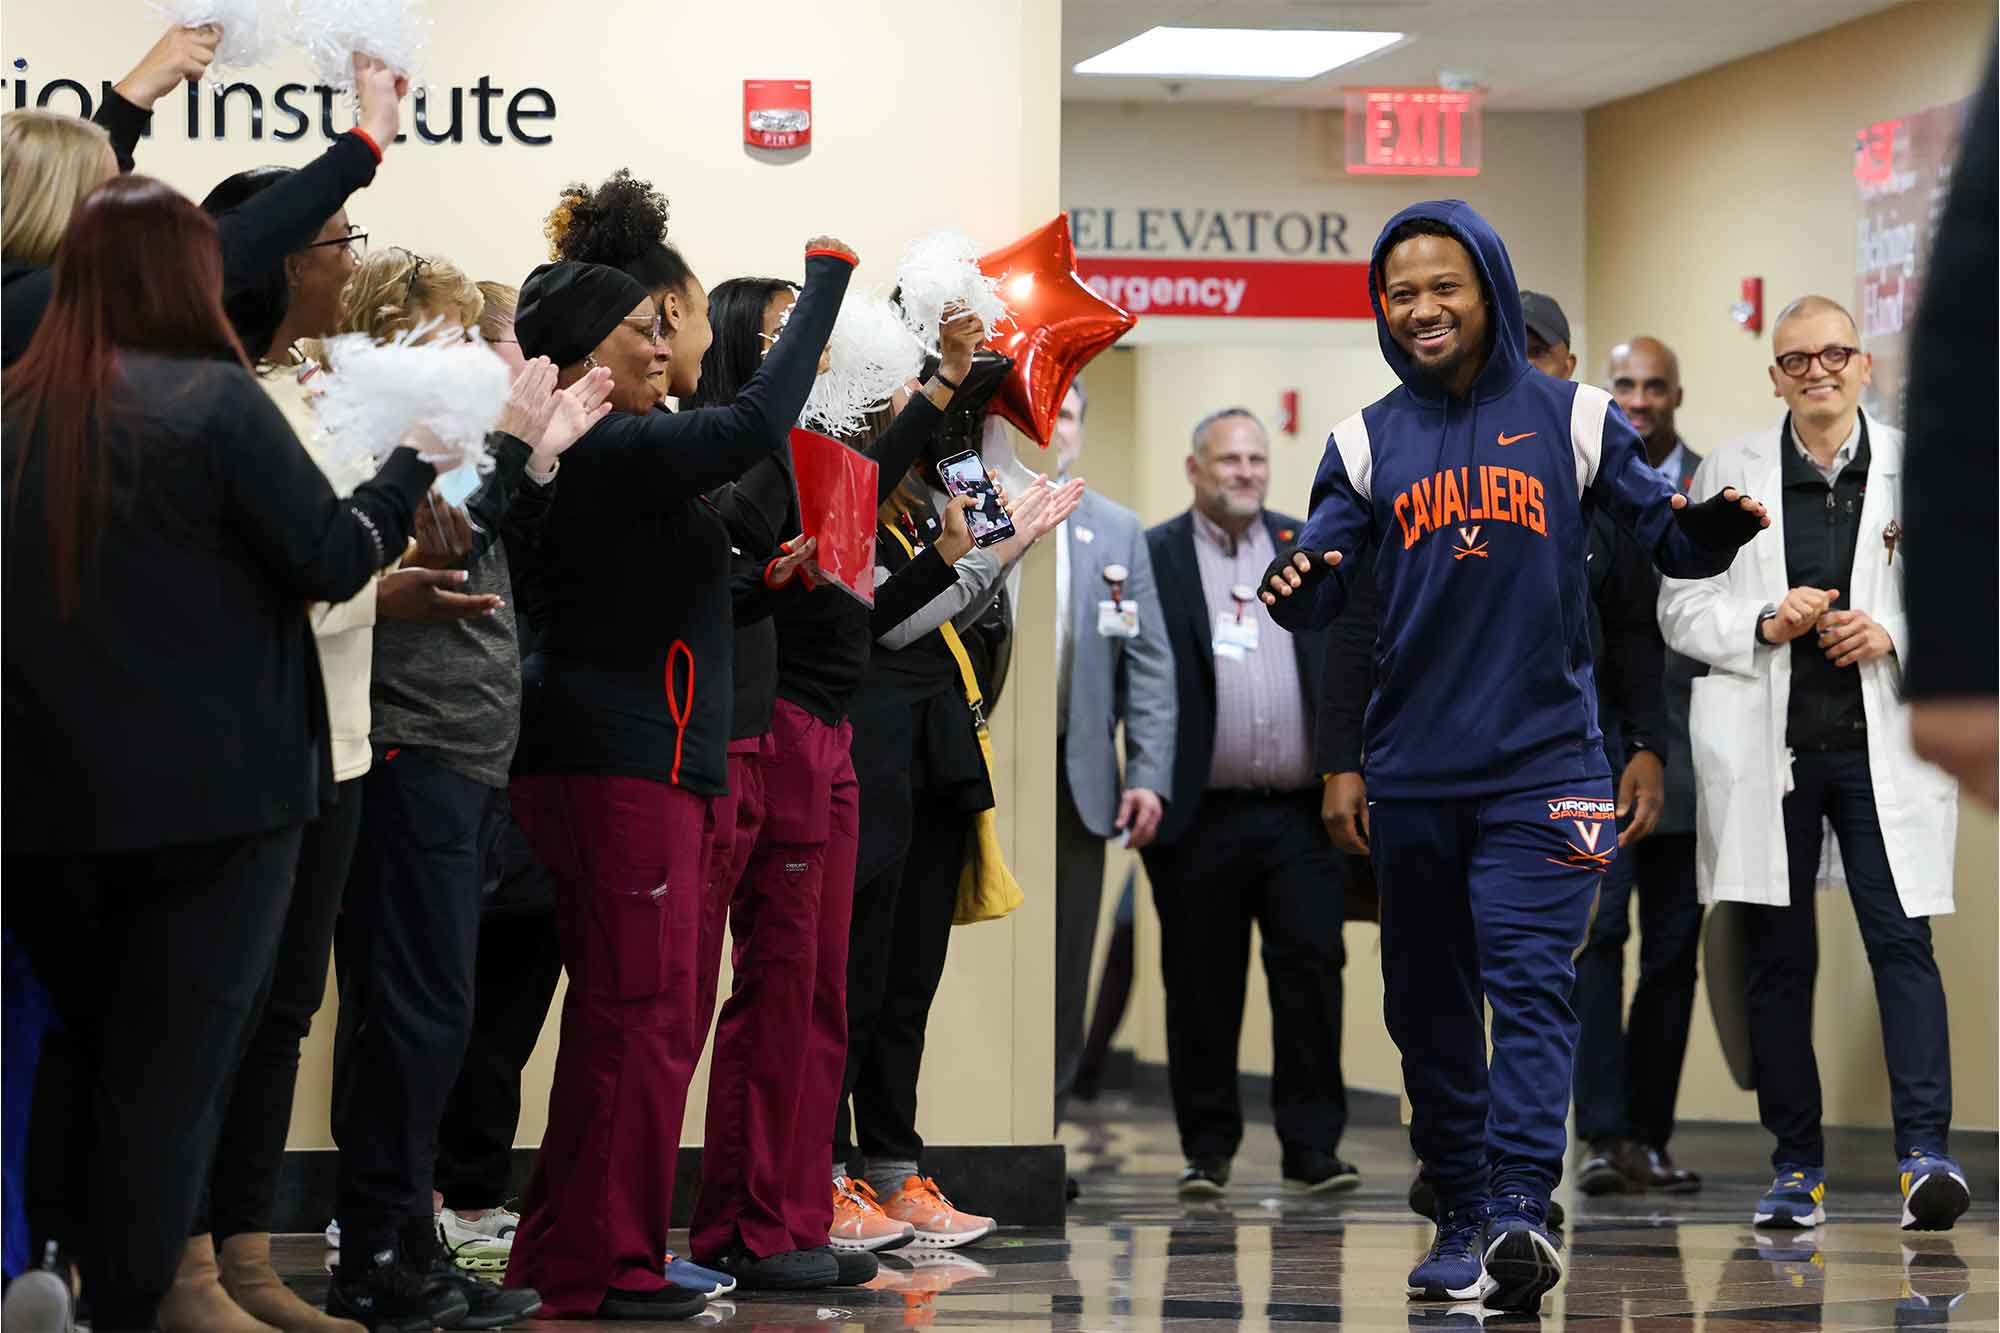 Perris Jones leaving the hospital with a crowd applauding his recovery 